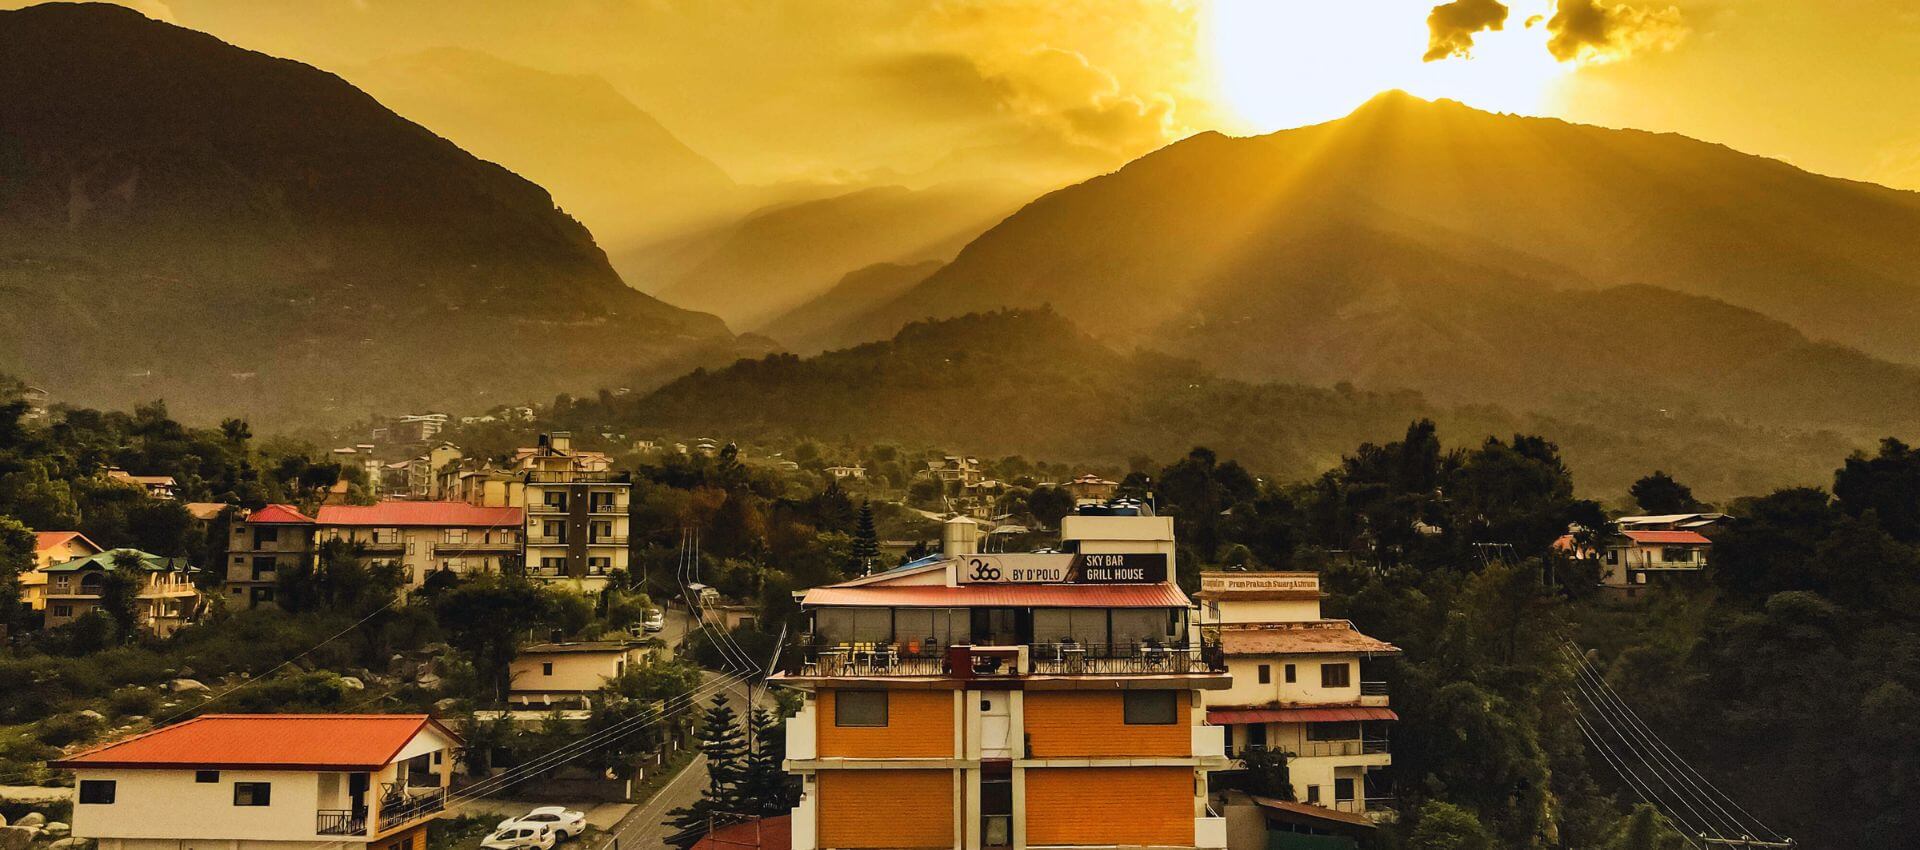 At the Best Hotel in Dharamshala, where comfort and stunning views combine with a quiet Himalayan backdrop, you may experience luxury and peace of mind.